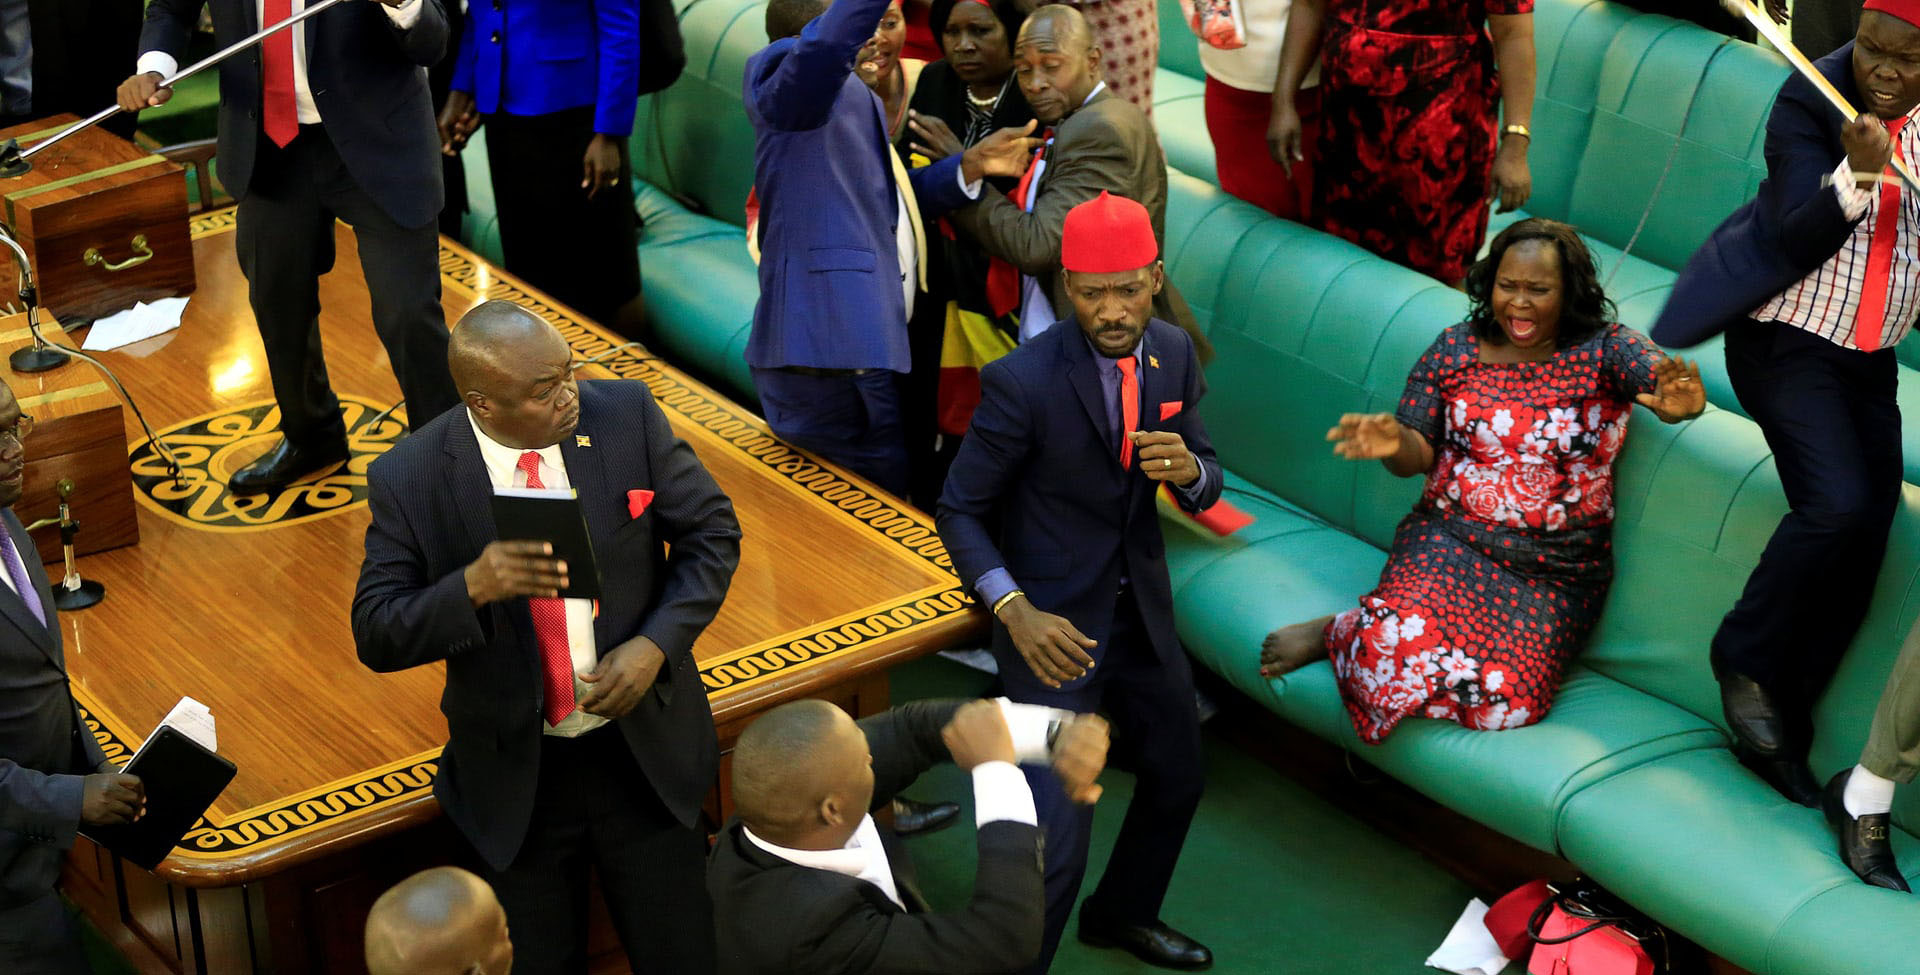 Majority of the influential members of Parliament from Uganda’s districts are undecided yet on the bill to remove the age limit clause 102(b) from the constitution.